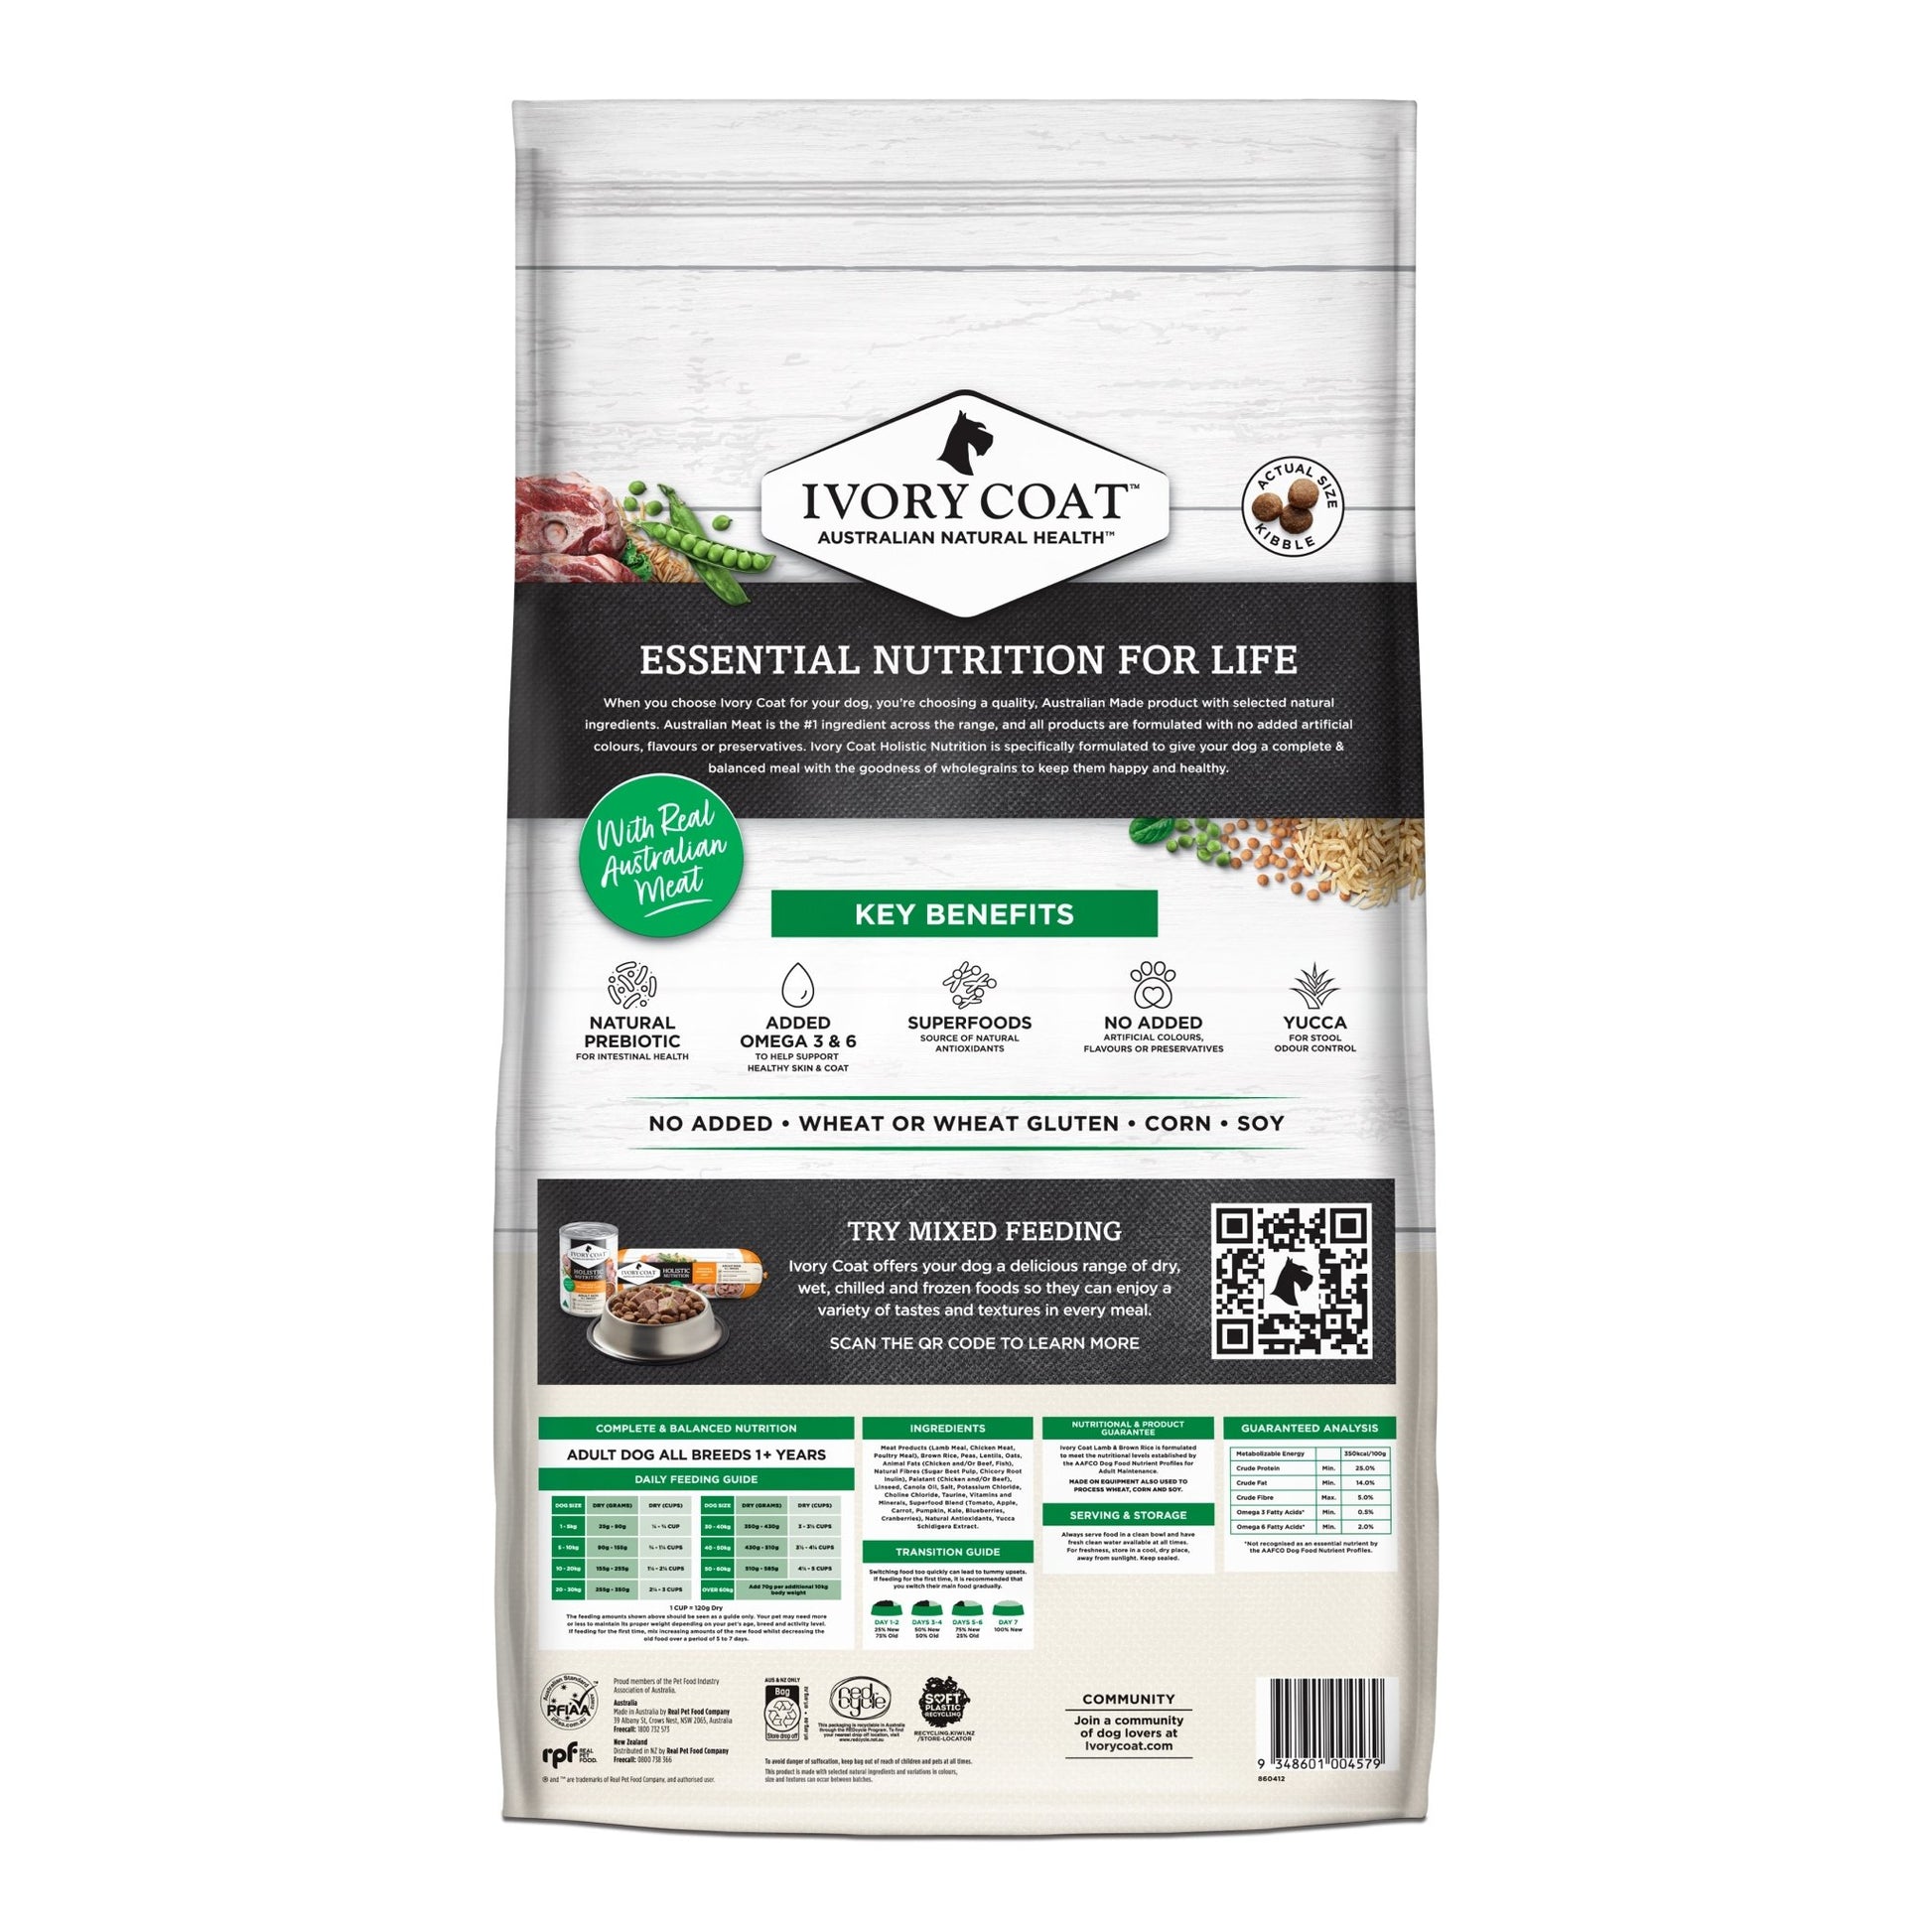 Ivory Coat Holistic Nutrition Dry Dog Food Adult Lamb and Brown Rice 15kg - Woonona Petfood & Produce